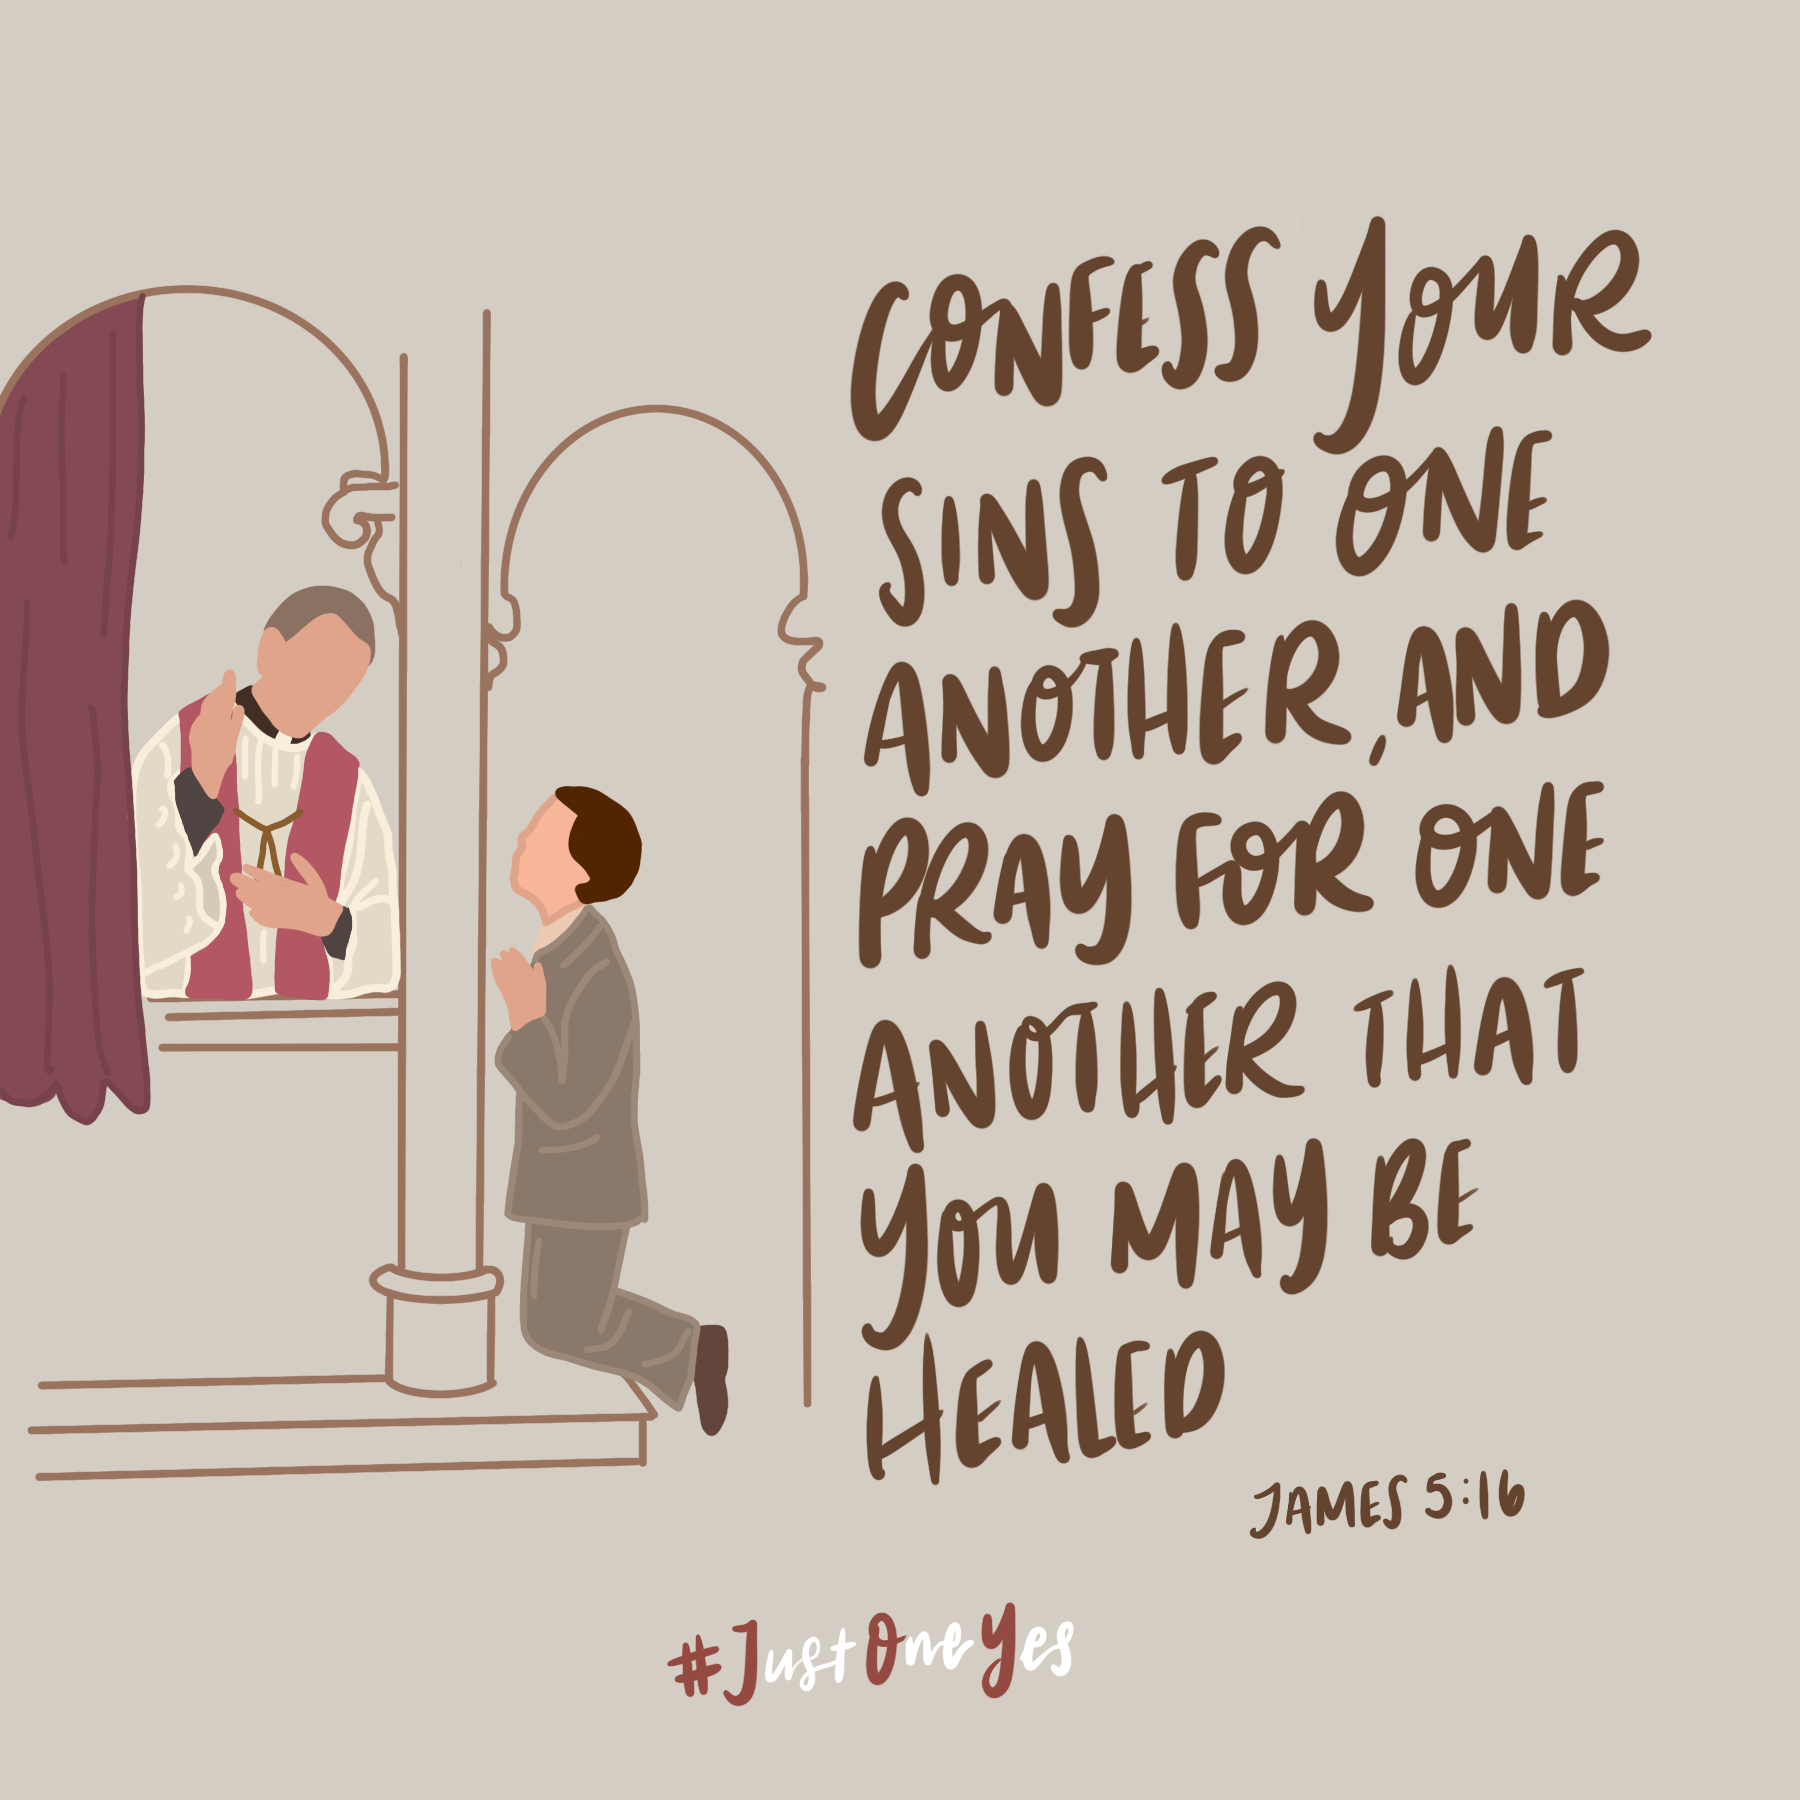 Just One Yes Confess Your Sins